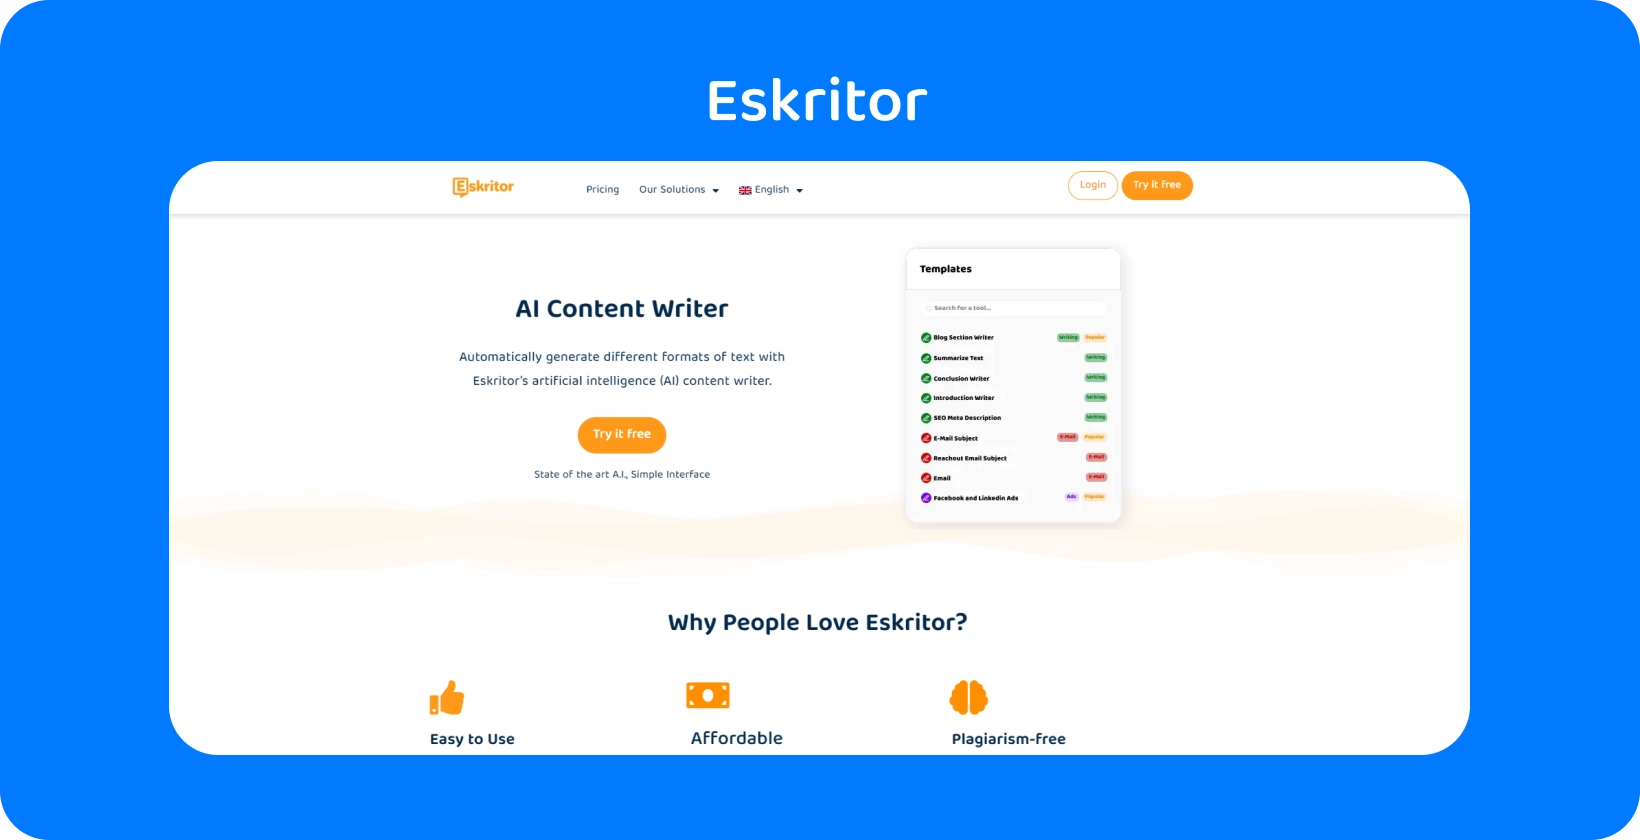 Eskritor homepage banner, emphasizing AI-powered legal writing assistant for lawyers.